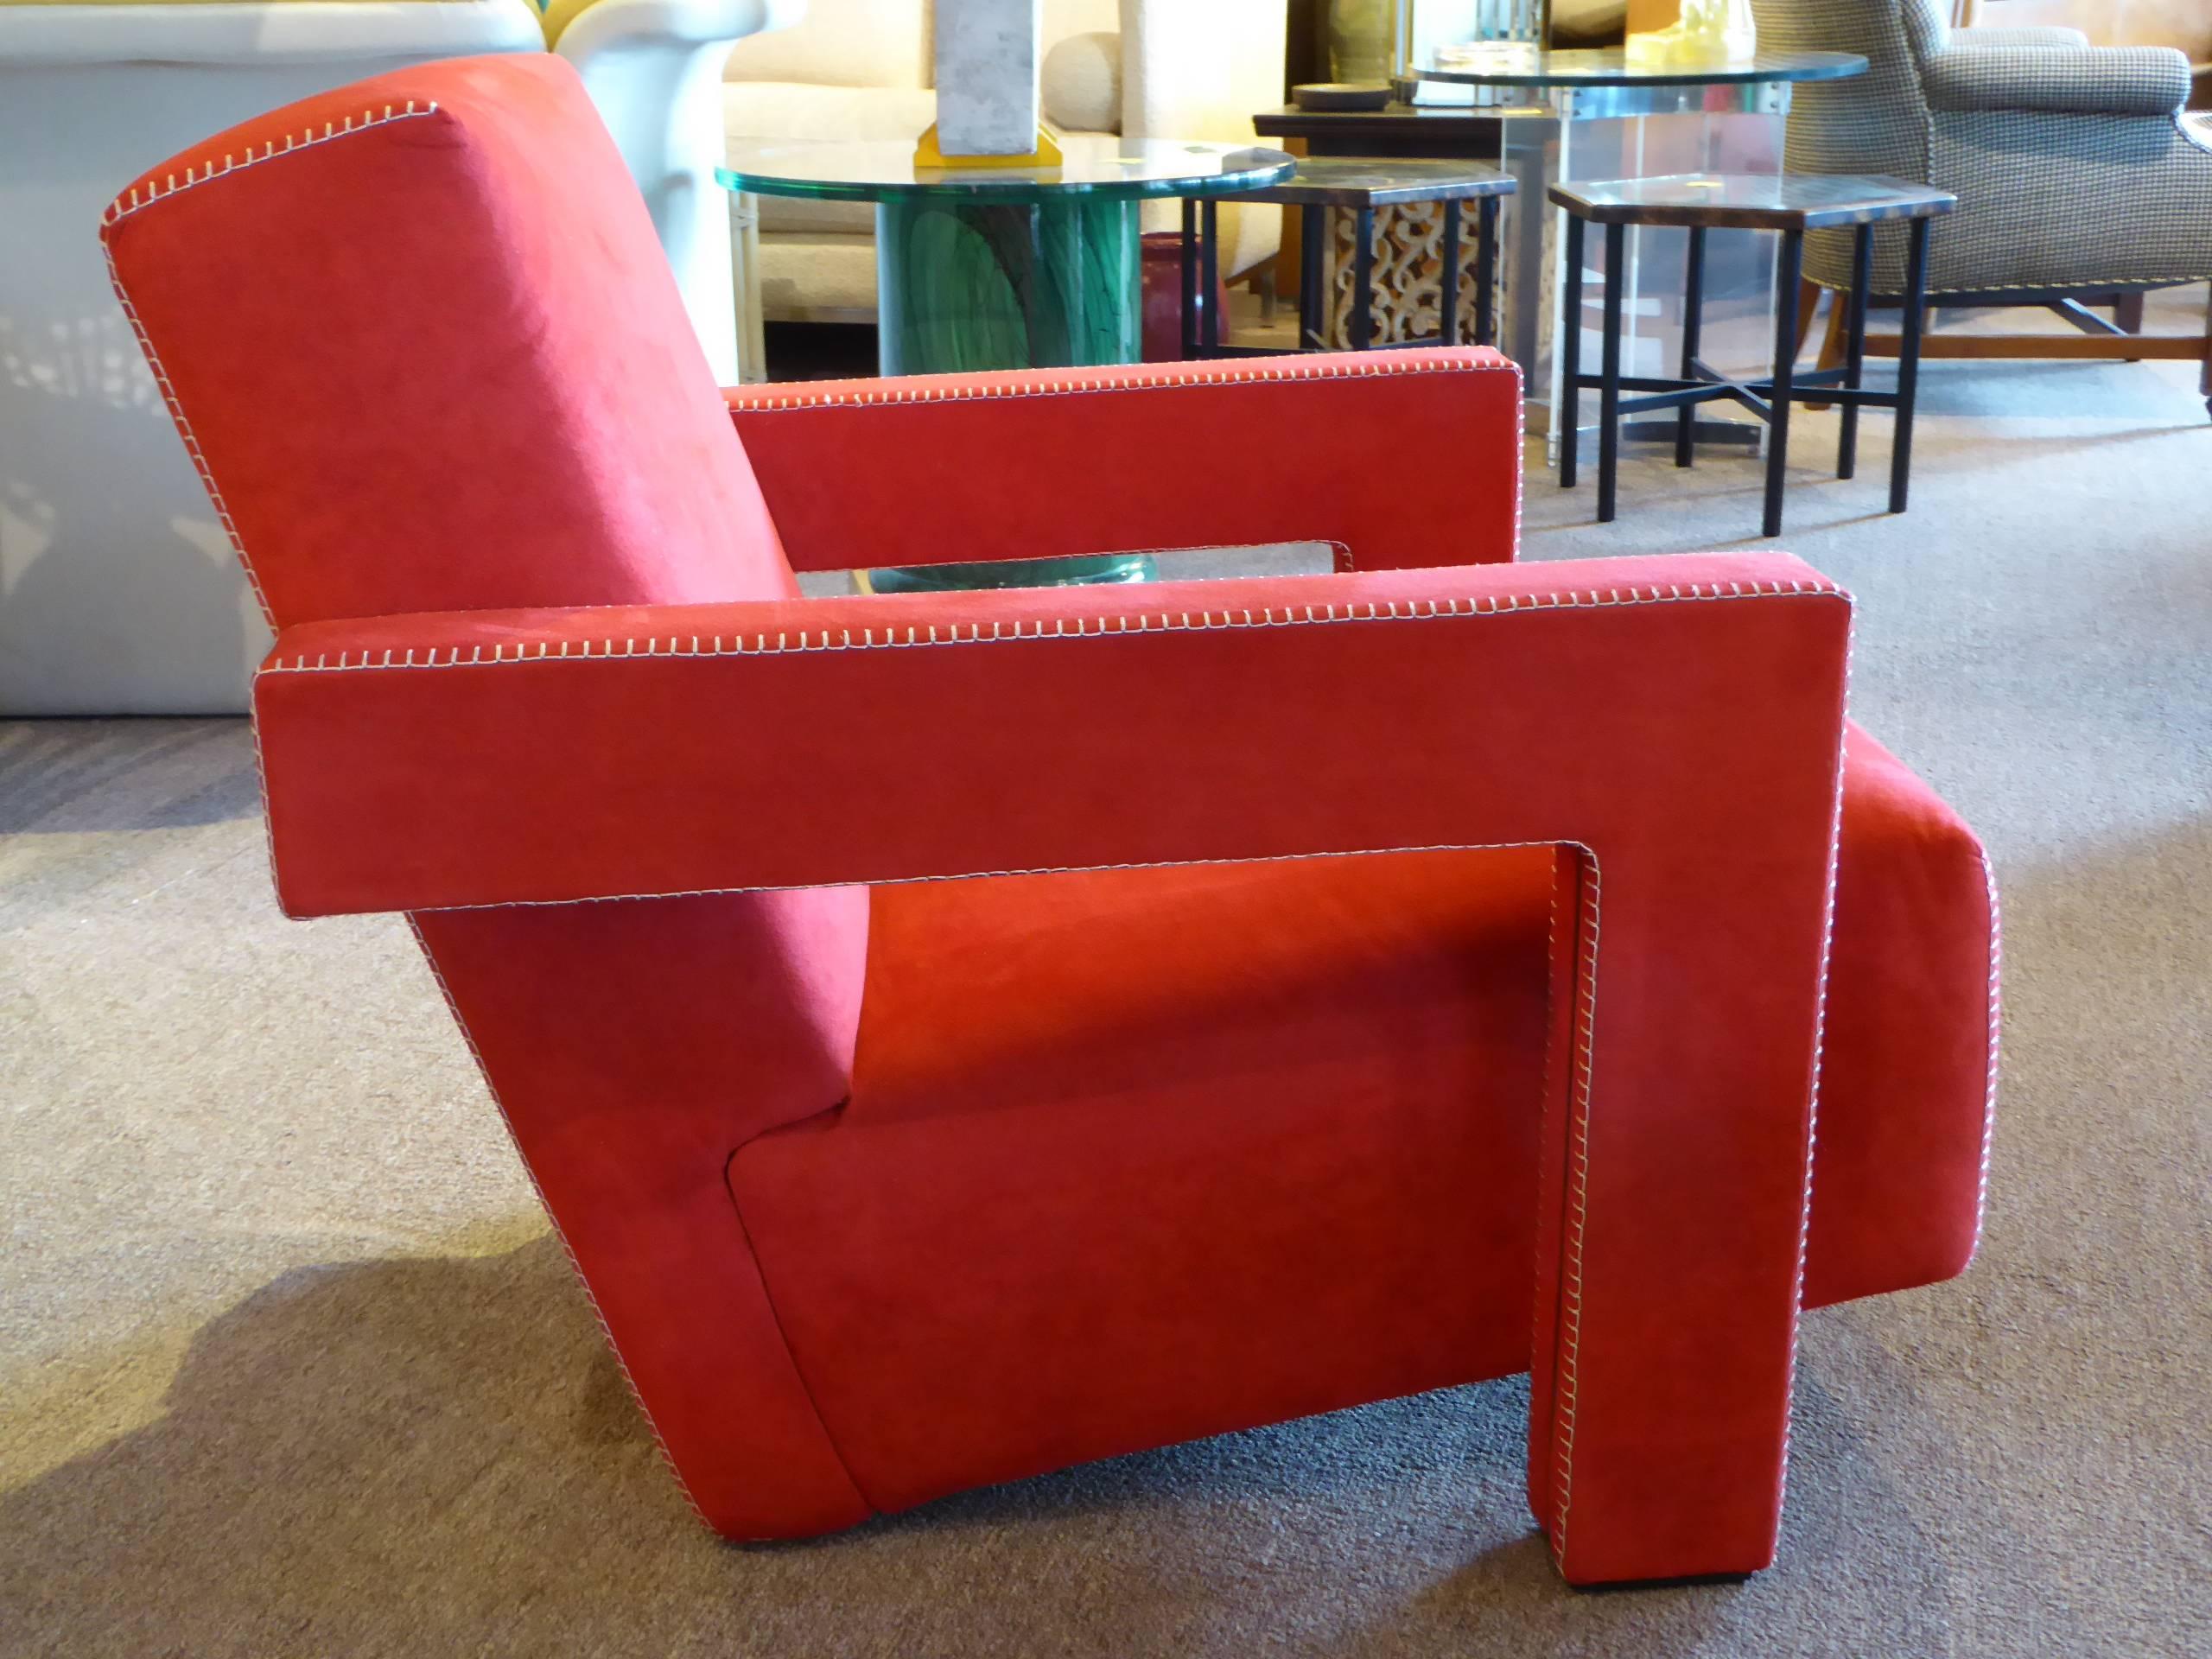 ...SOLD...Noted Dutch architect and furniture designer Gerrit Thomas Rietveld designed this Utrecht chair in 1935. Cassina in 1988, on the occasion of the 100th anniversary of his birth, re-issued the design. Here in a red ultrasuede with white